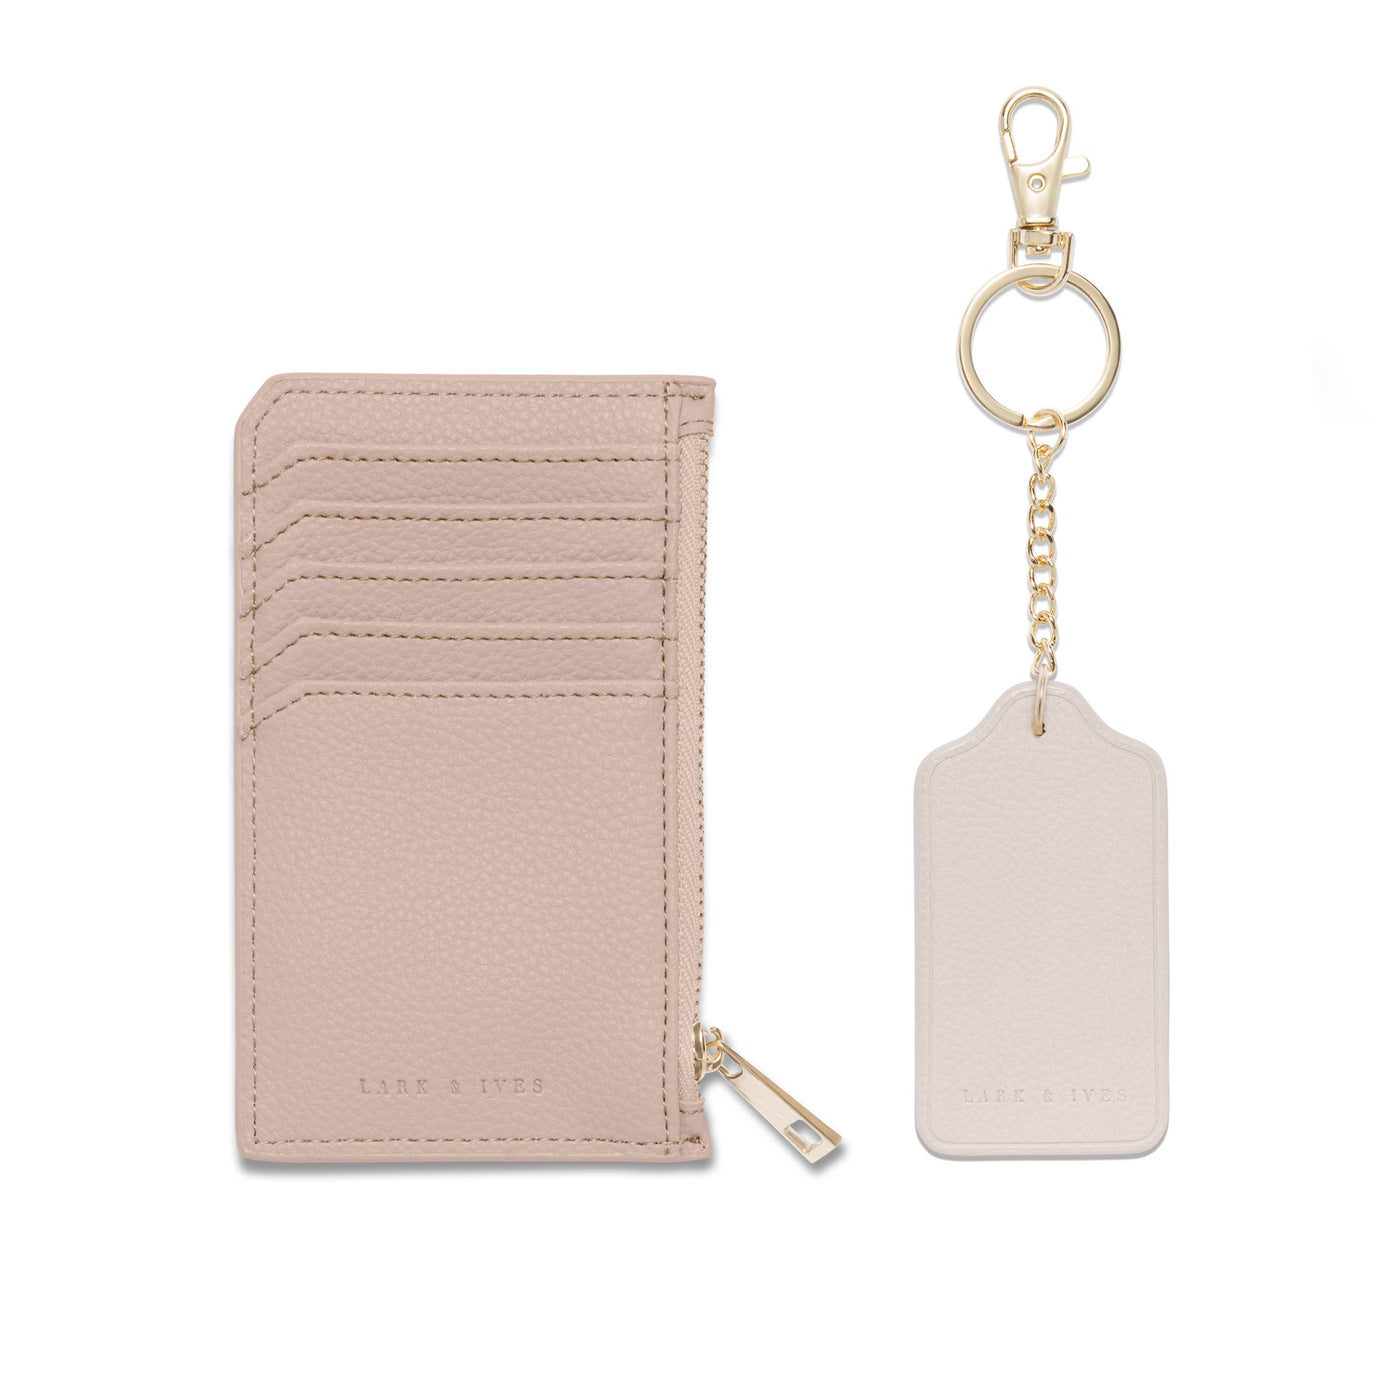 Lark and Ives / Vegan Leather Accessories / Small Accessories / Wallet / Mini Wallet / Card Case / Card Holder / Zippered Wallet / Zipper closure / Keychain / Key ring / Tag Keychain / Nude Pink Holder and Beige Keychain